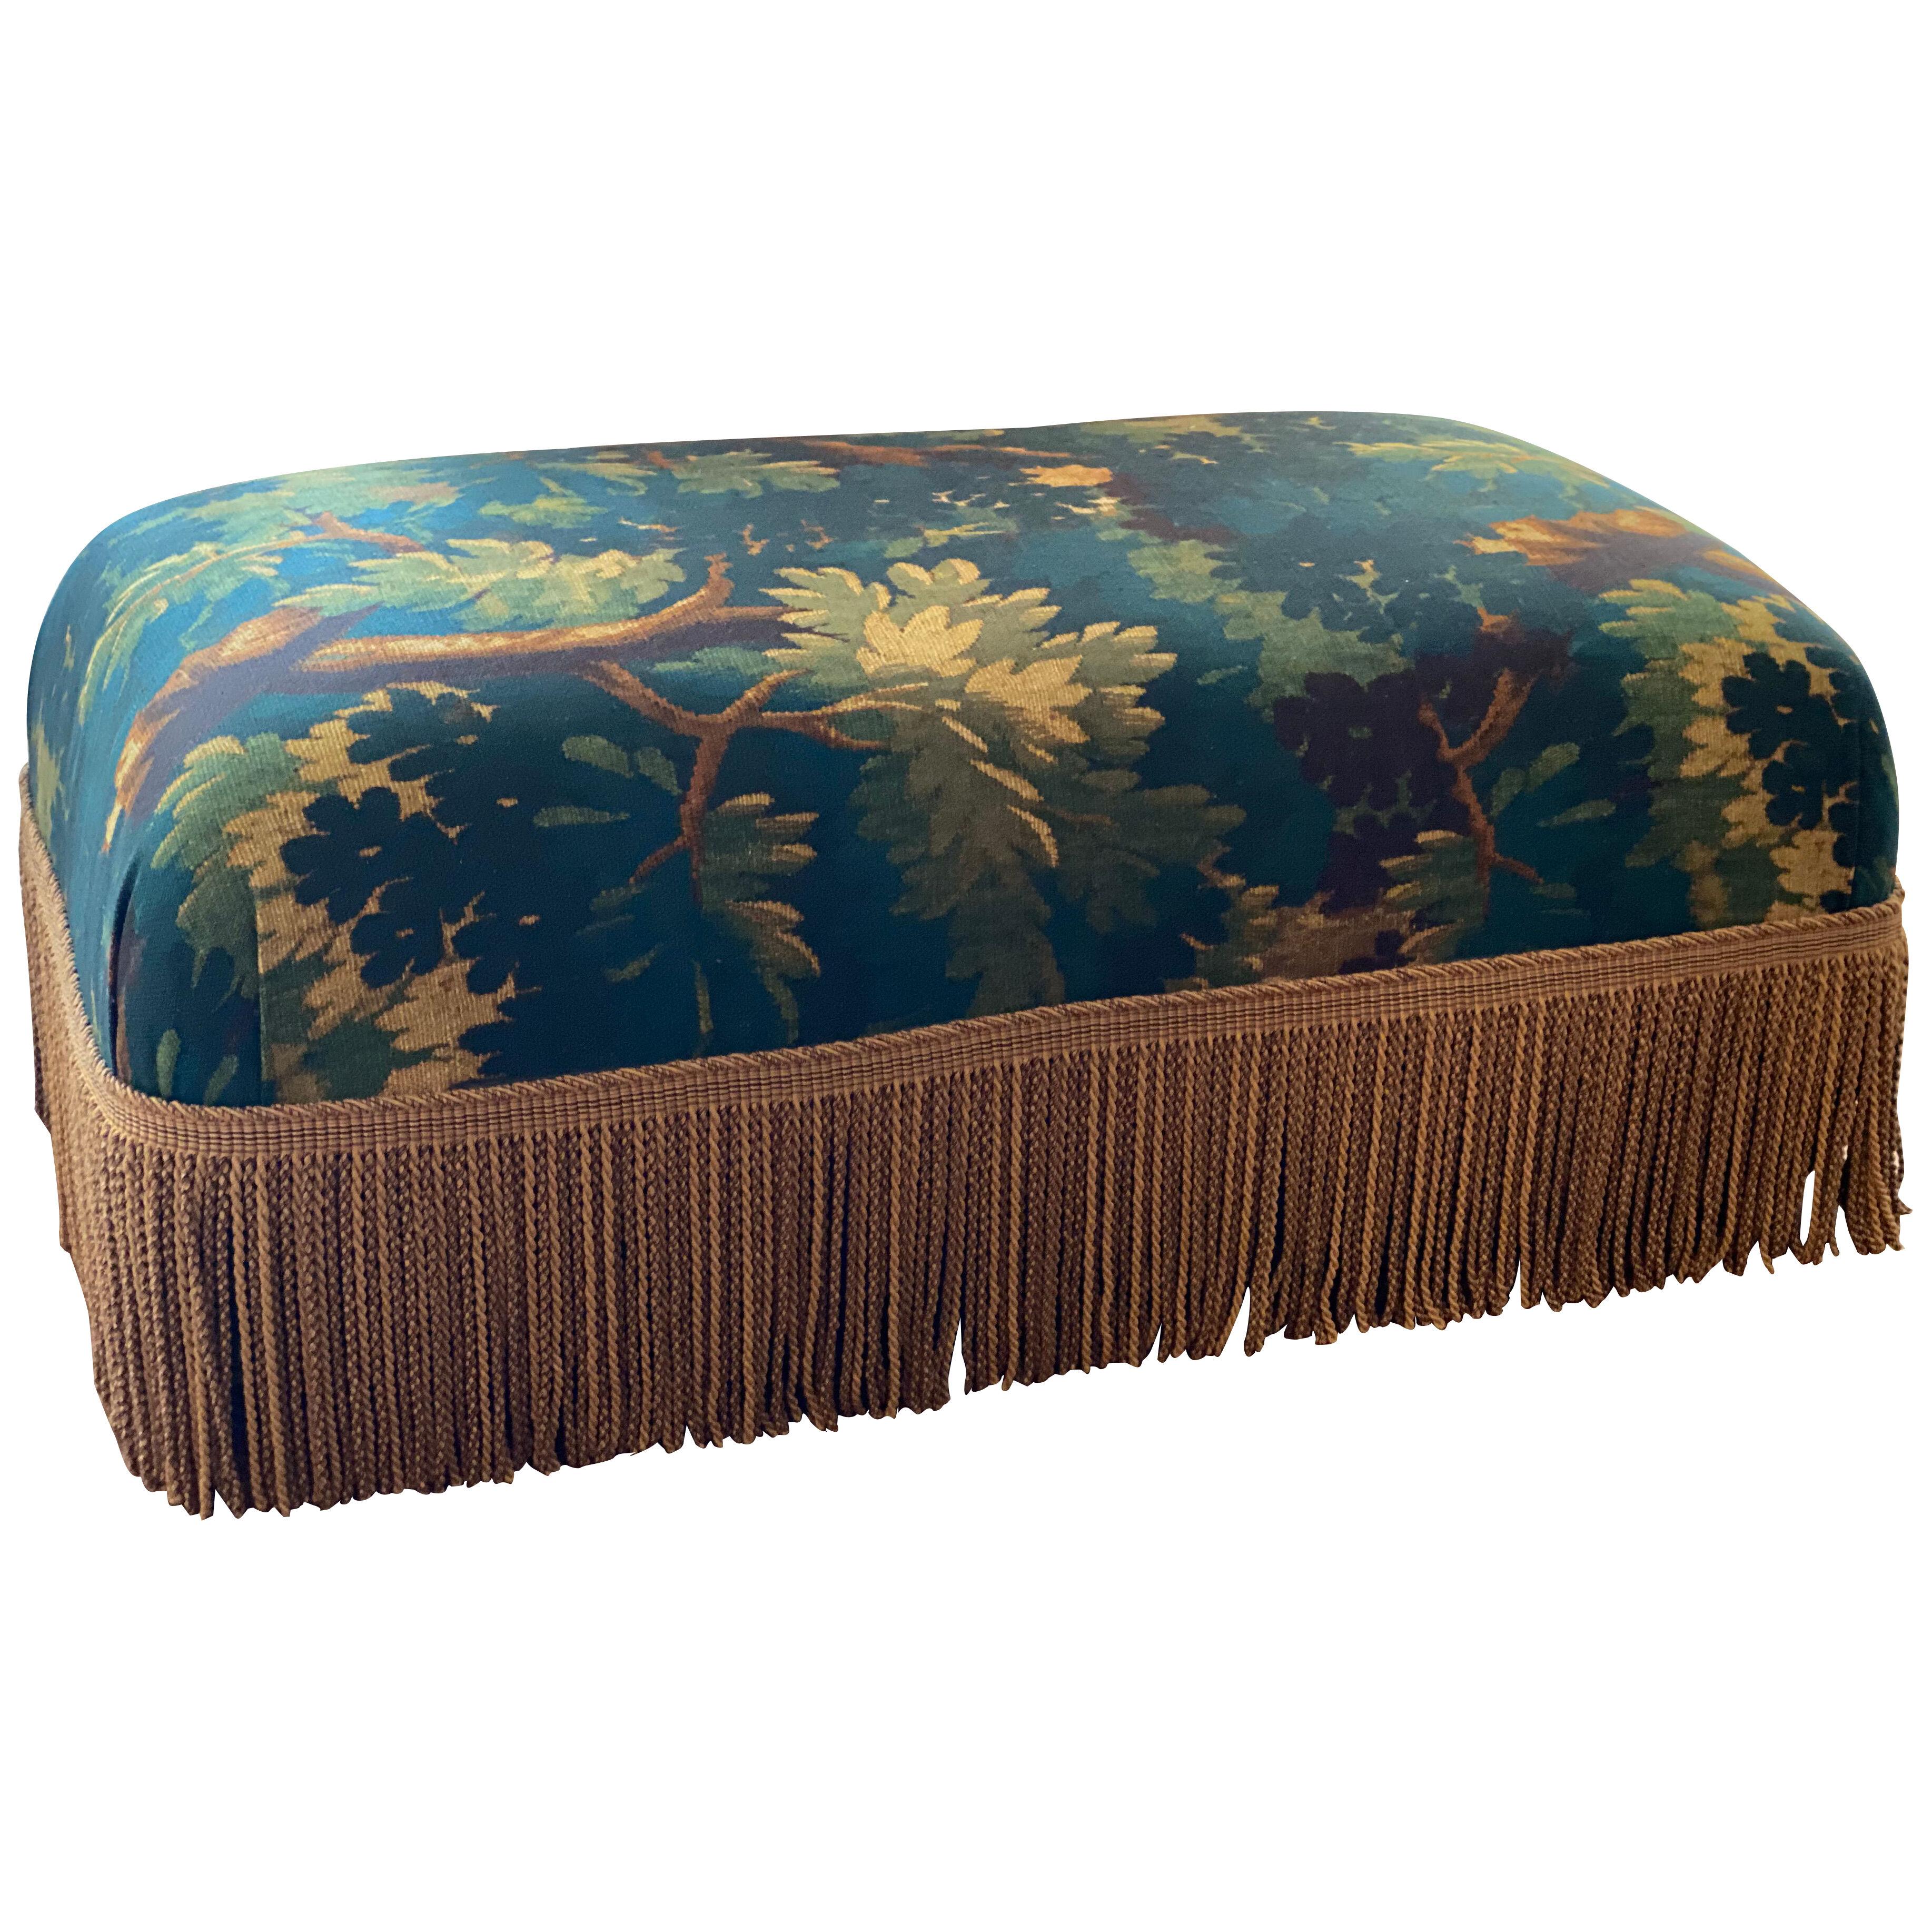 Pouf With Tapistery Upholstery and Gold Colored Frills